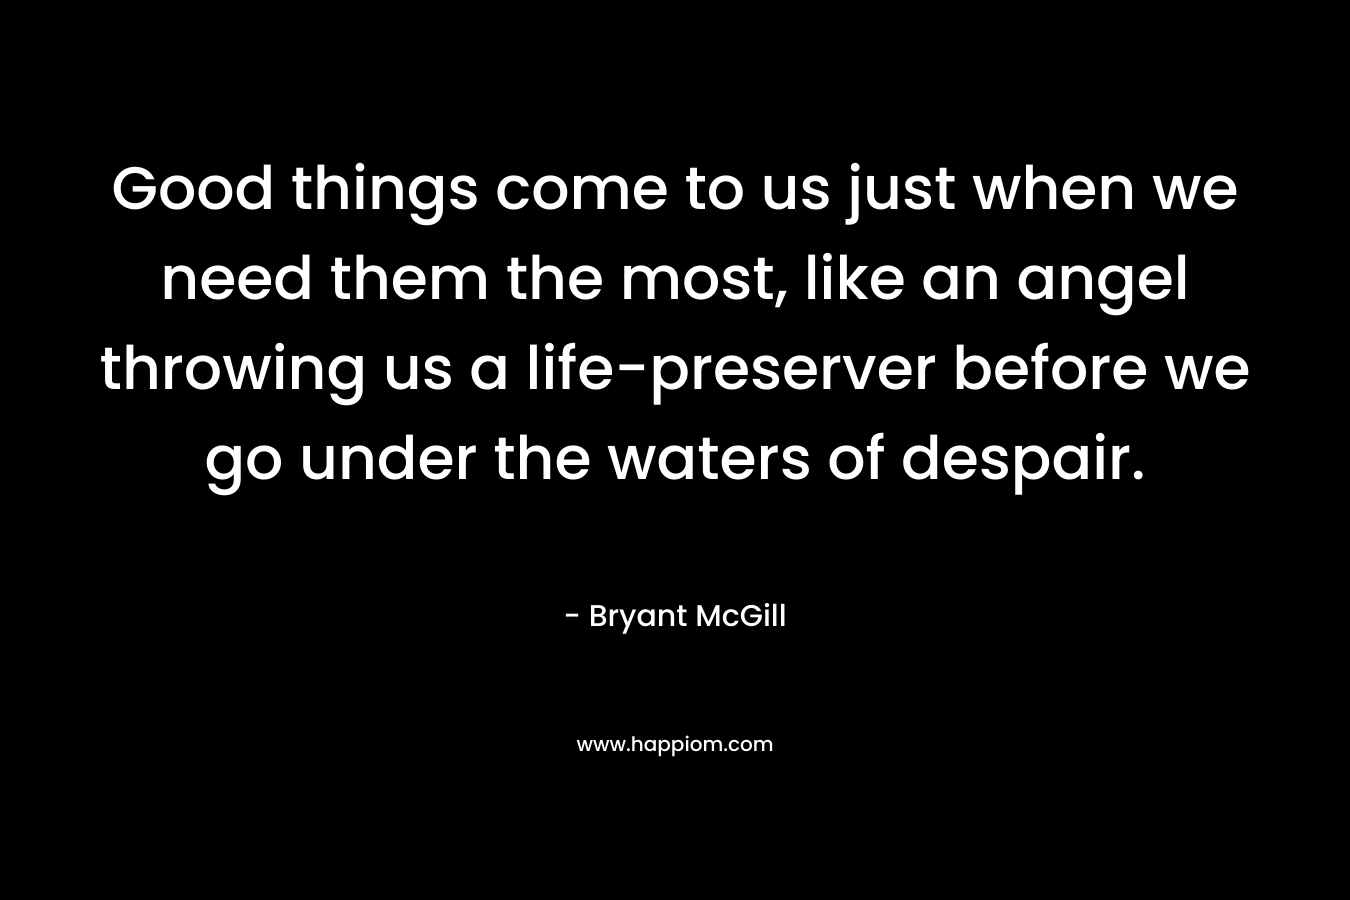 Good things come to us just when we need them the most, like an angel throwing us a life-preserver before we go under the waters of despair. – Bryant McGill